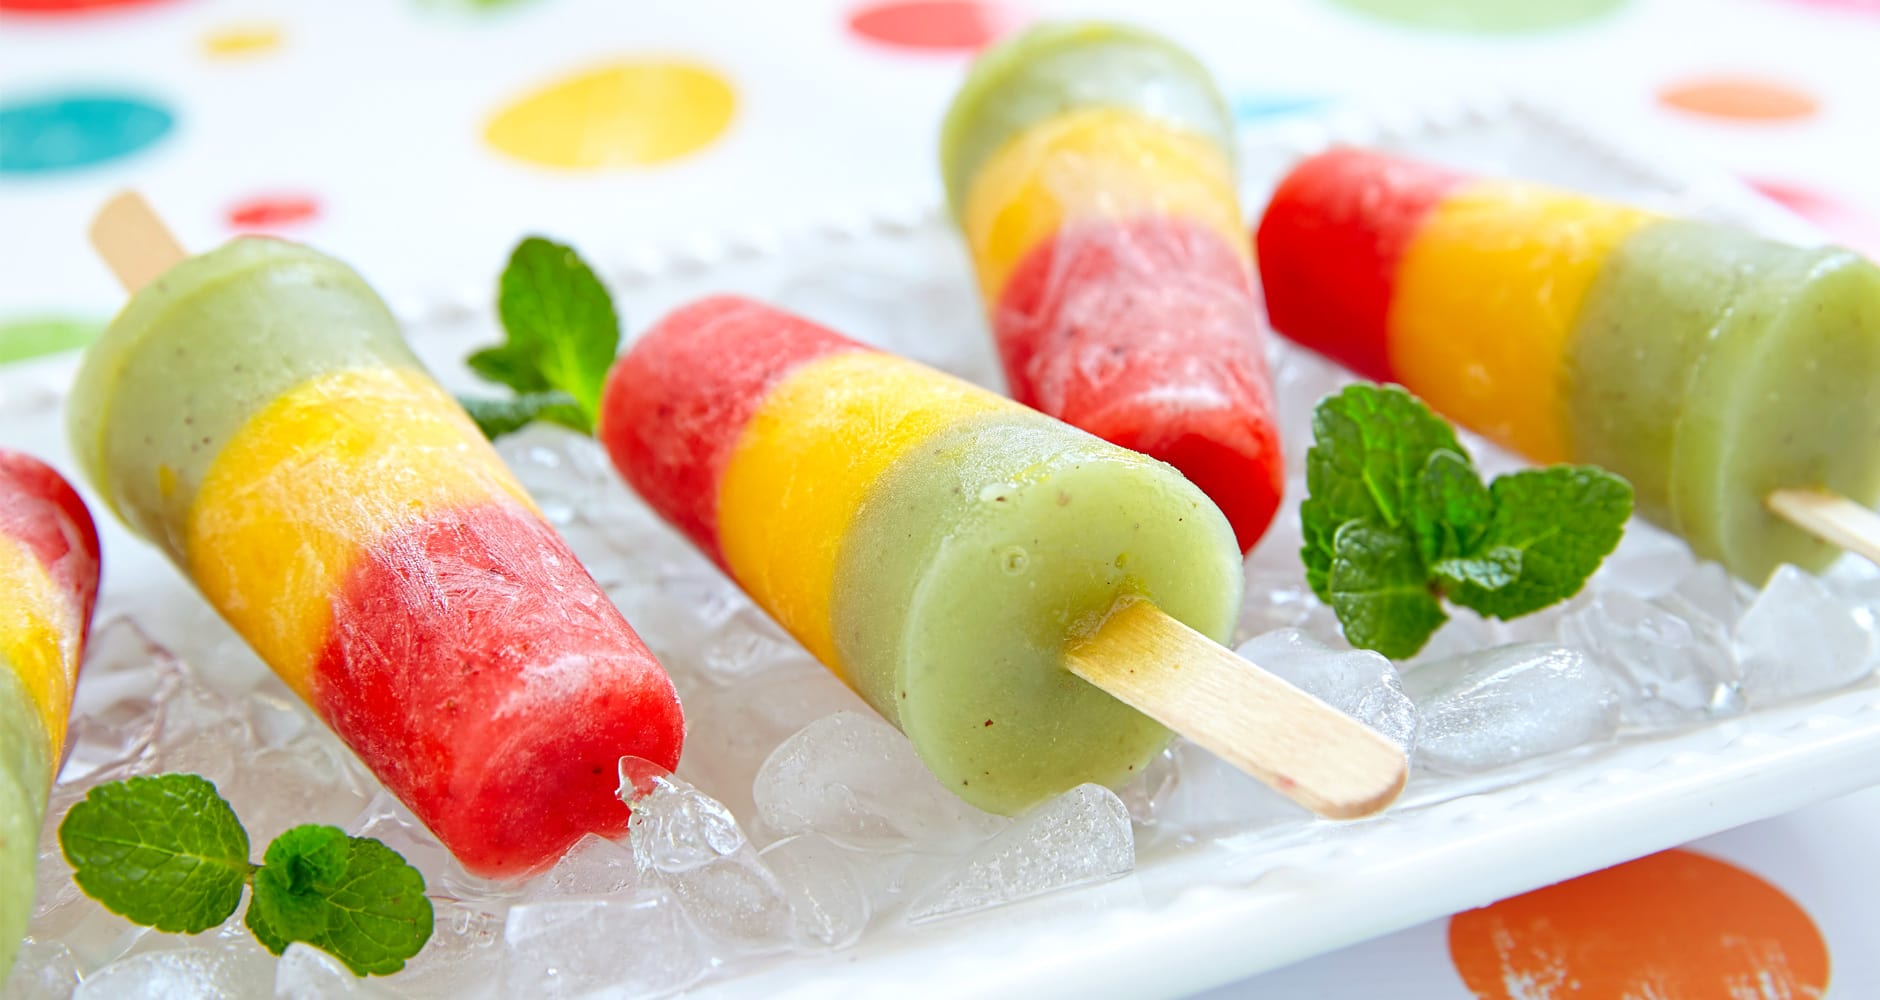 20 Ice Pop Nutrition Facts 